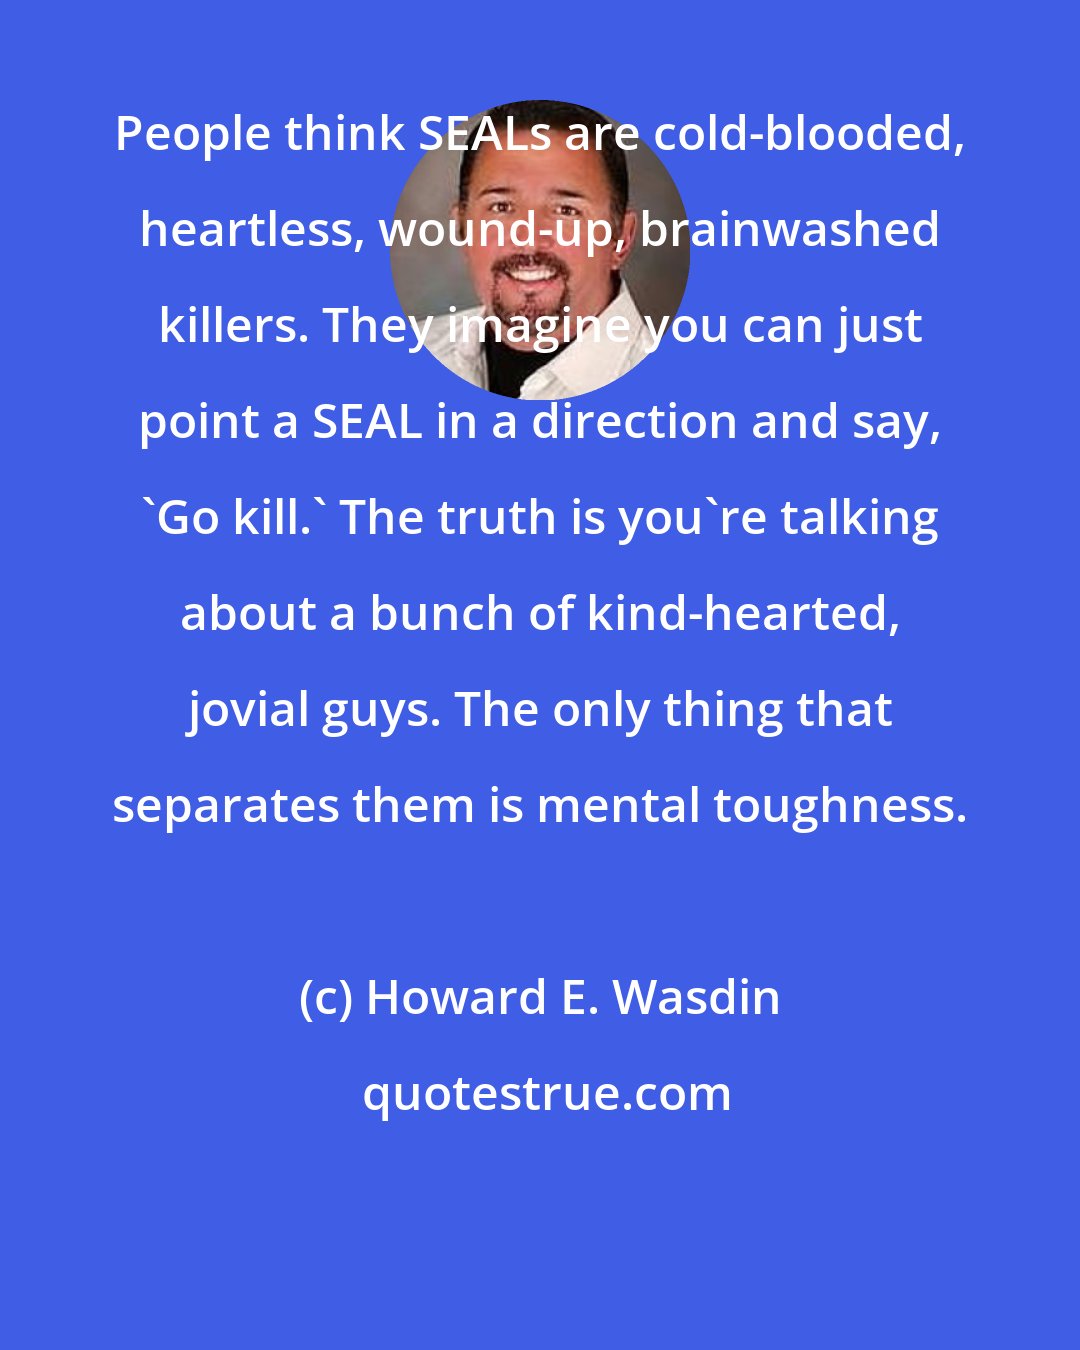 Howard E. Wasdin: People think SEALs are cold-blooded, heartless, wound-up, brainwashed killers. They imagine you can just point a SEAL in a direction and say, 'Go kill.' The truth is you're talking about a bunch of kind-hearted, jovial guys. The only thing that separates them is mental toughness.